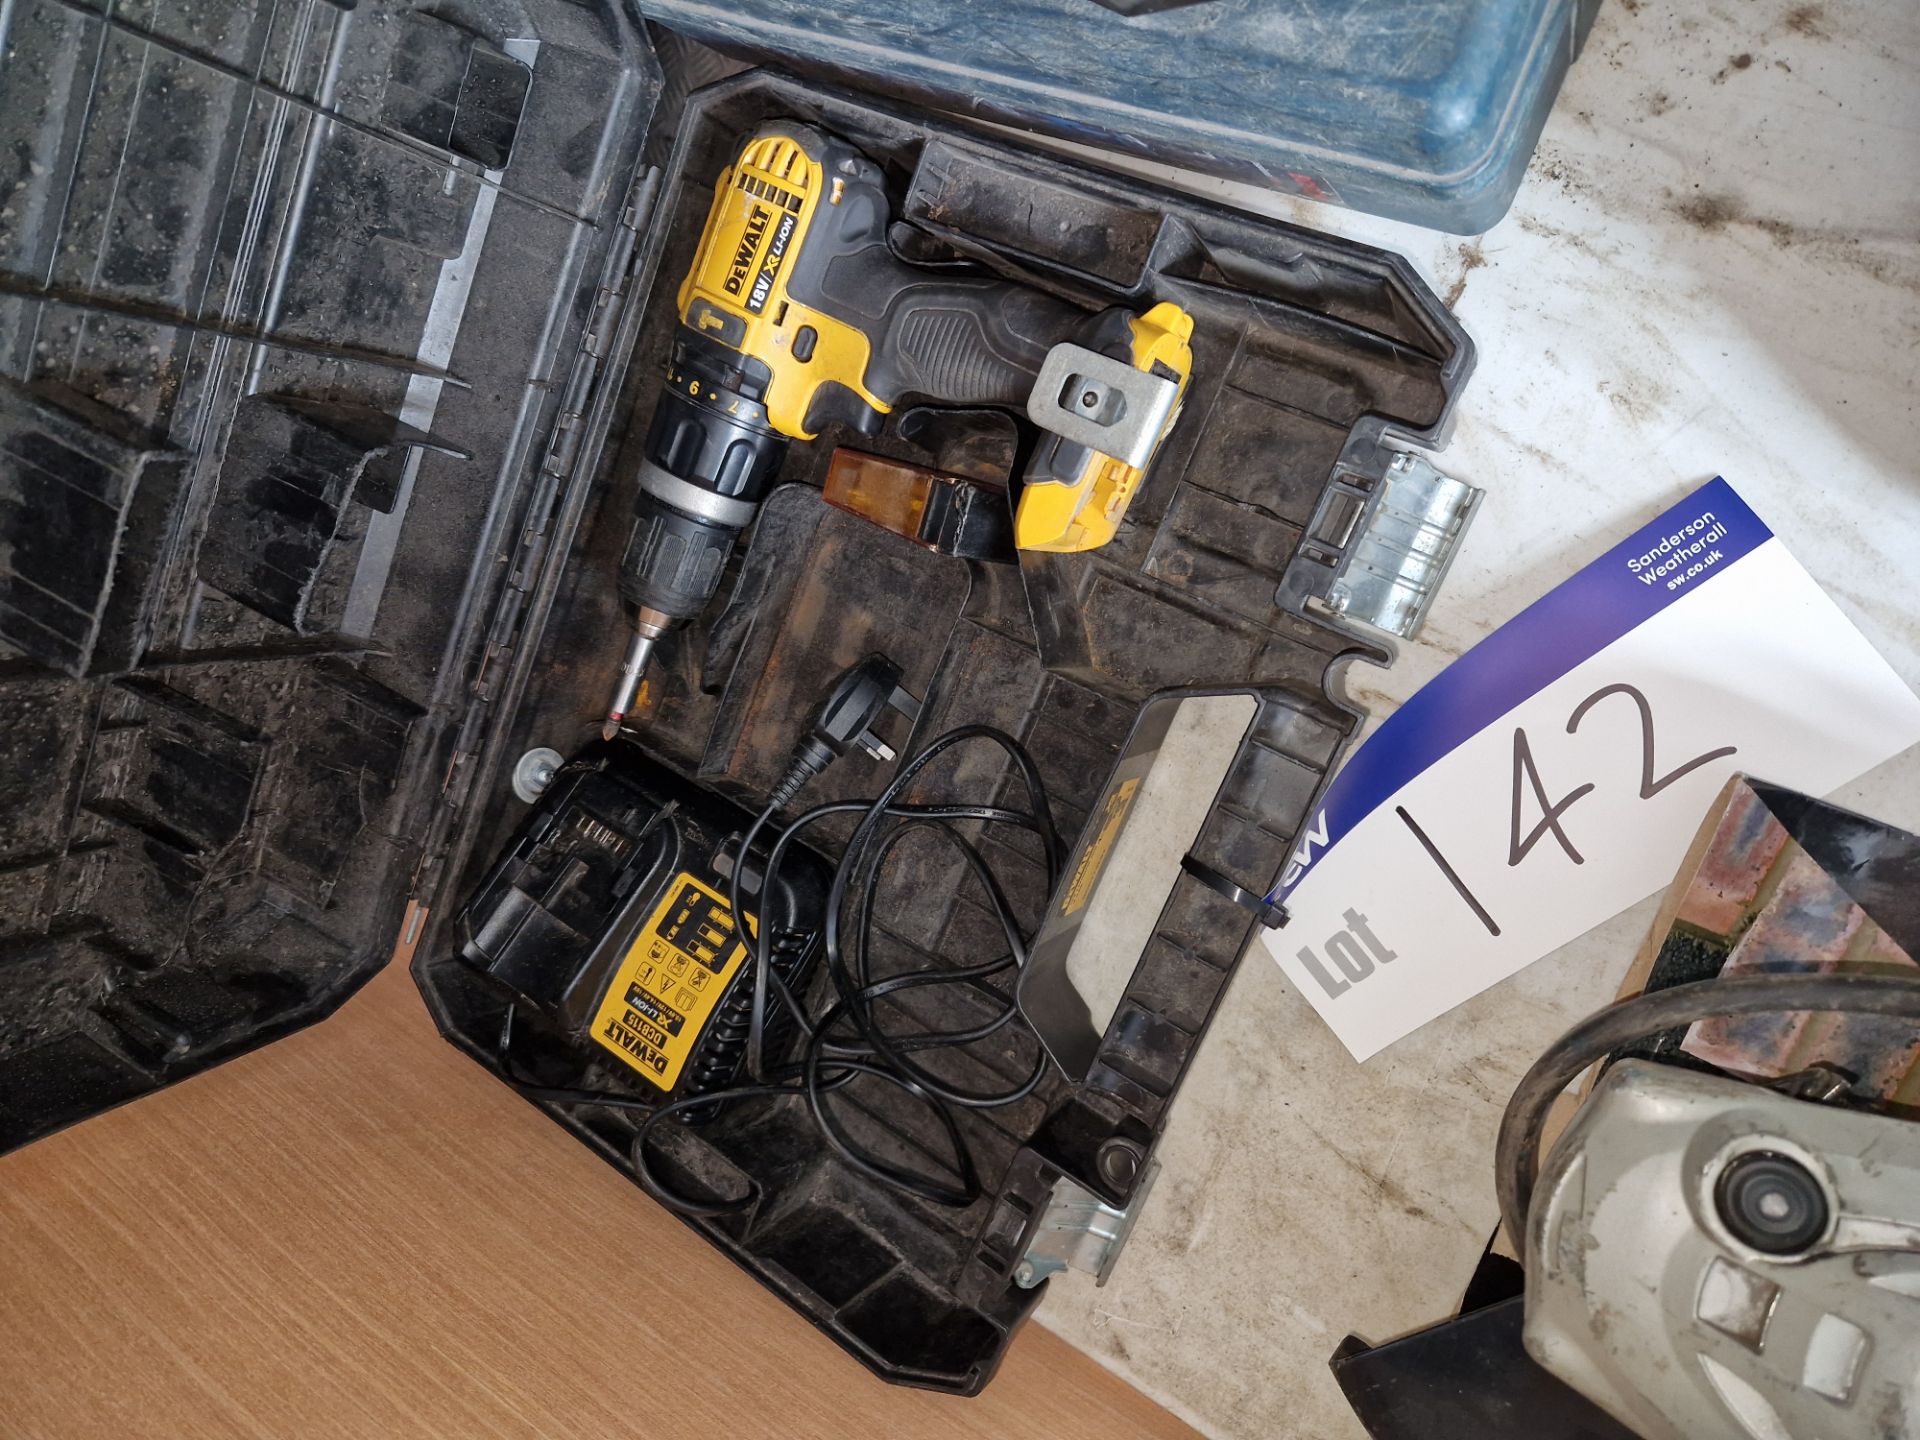 DeWalt DCD785 18V Battery Powered Drill, with Carry Case and Charger (No Battery) Please read the